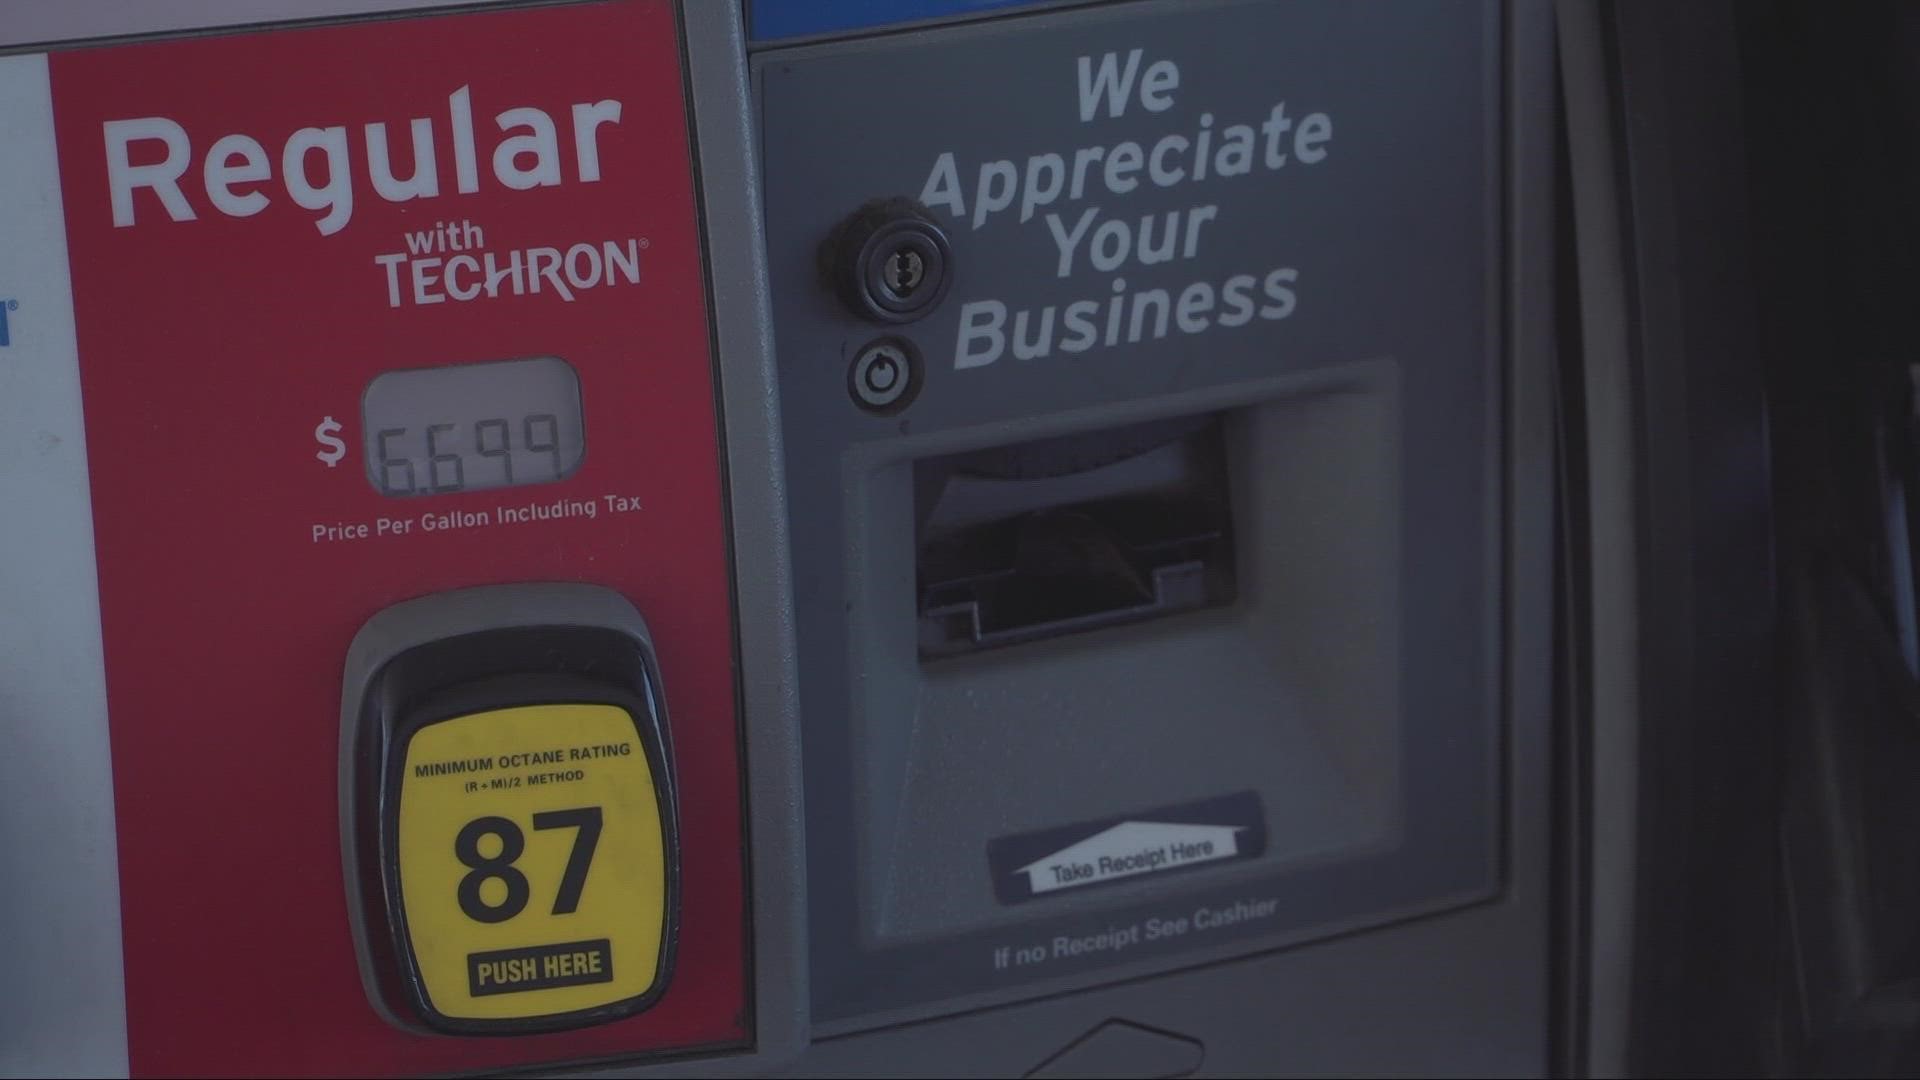 California gas prices: The new average price for a gallon of gas in California is $6.18, according to AAA.